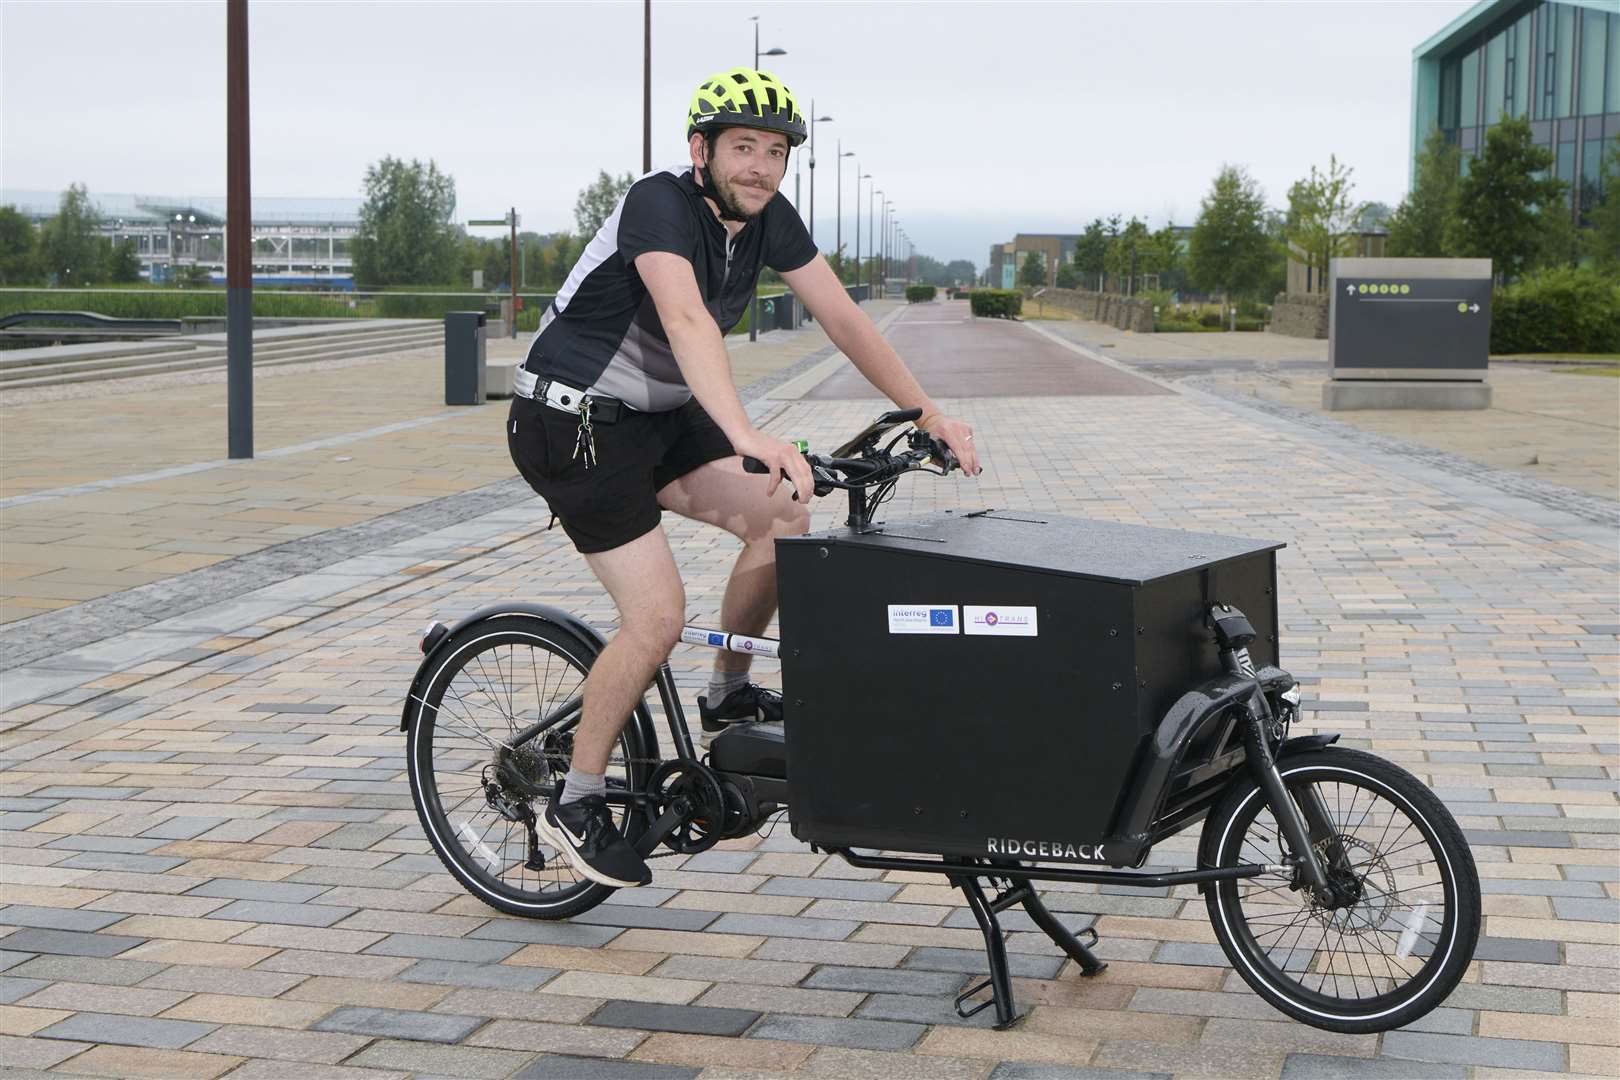 Matthew Lafferty, of Laughing Tree Couriers, on the electric cargo bike.